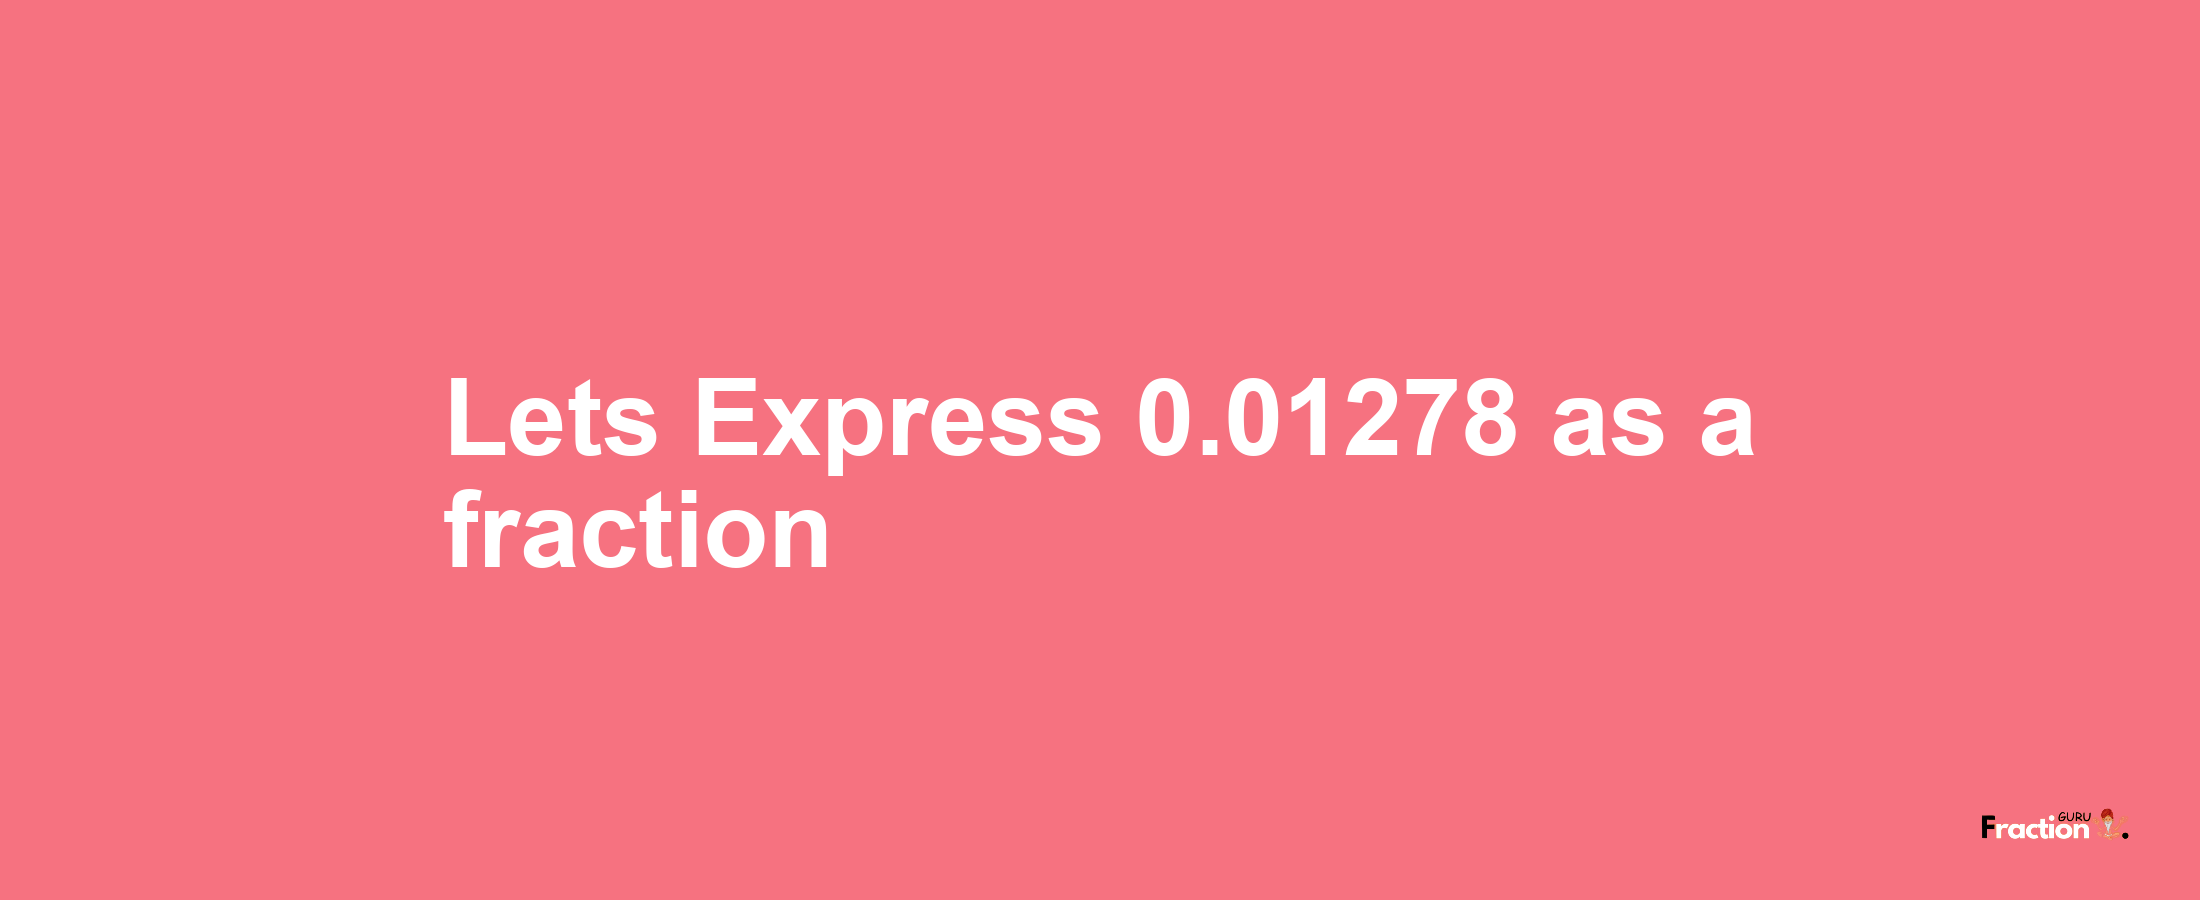 Lets Express 0.01278 as afraction